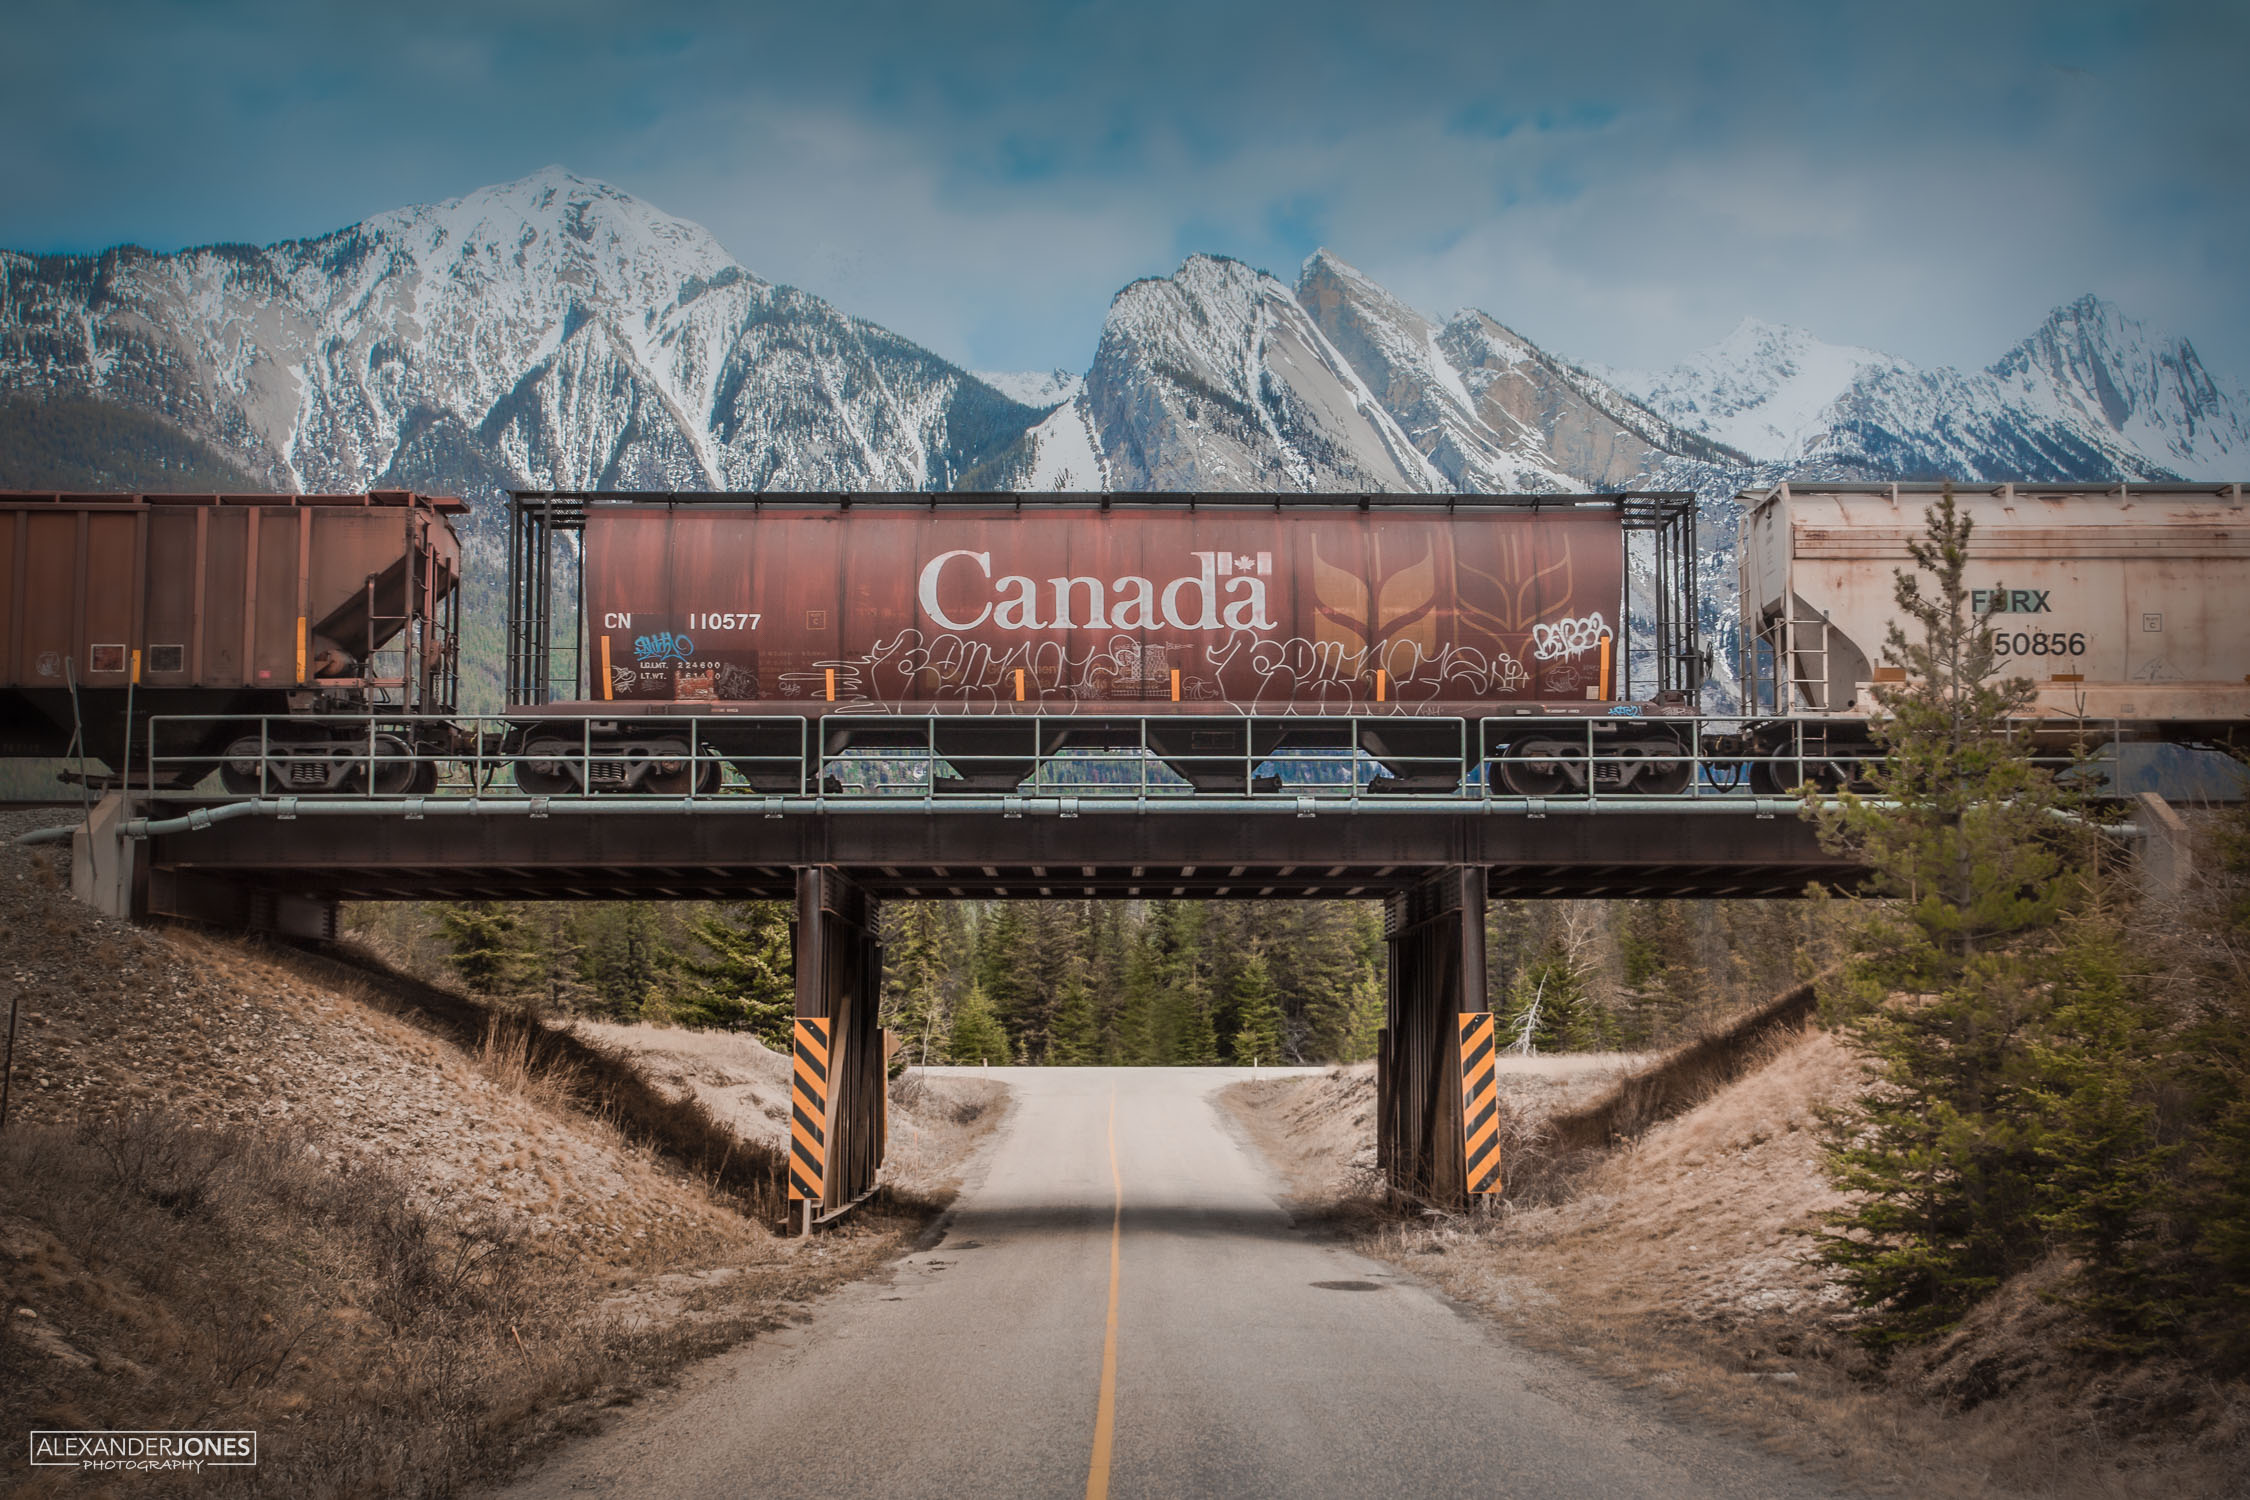 Canadian freight train with mountains in the background in the canadian rocky mountains in jasper national park